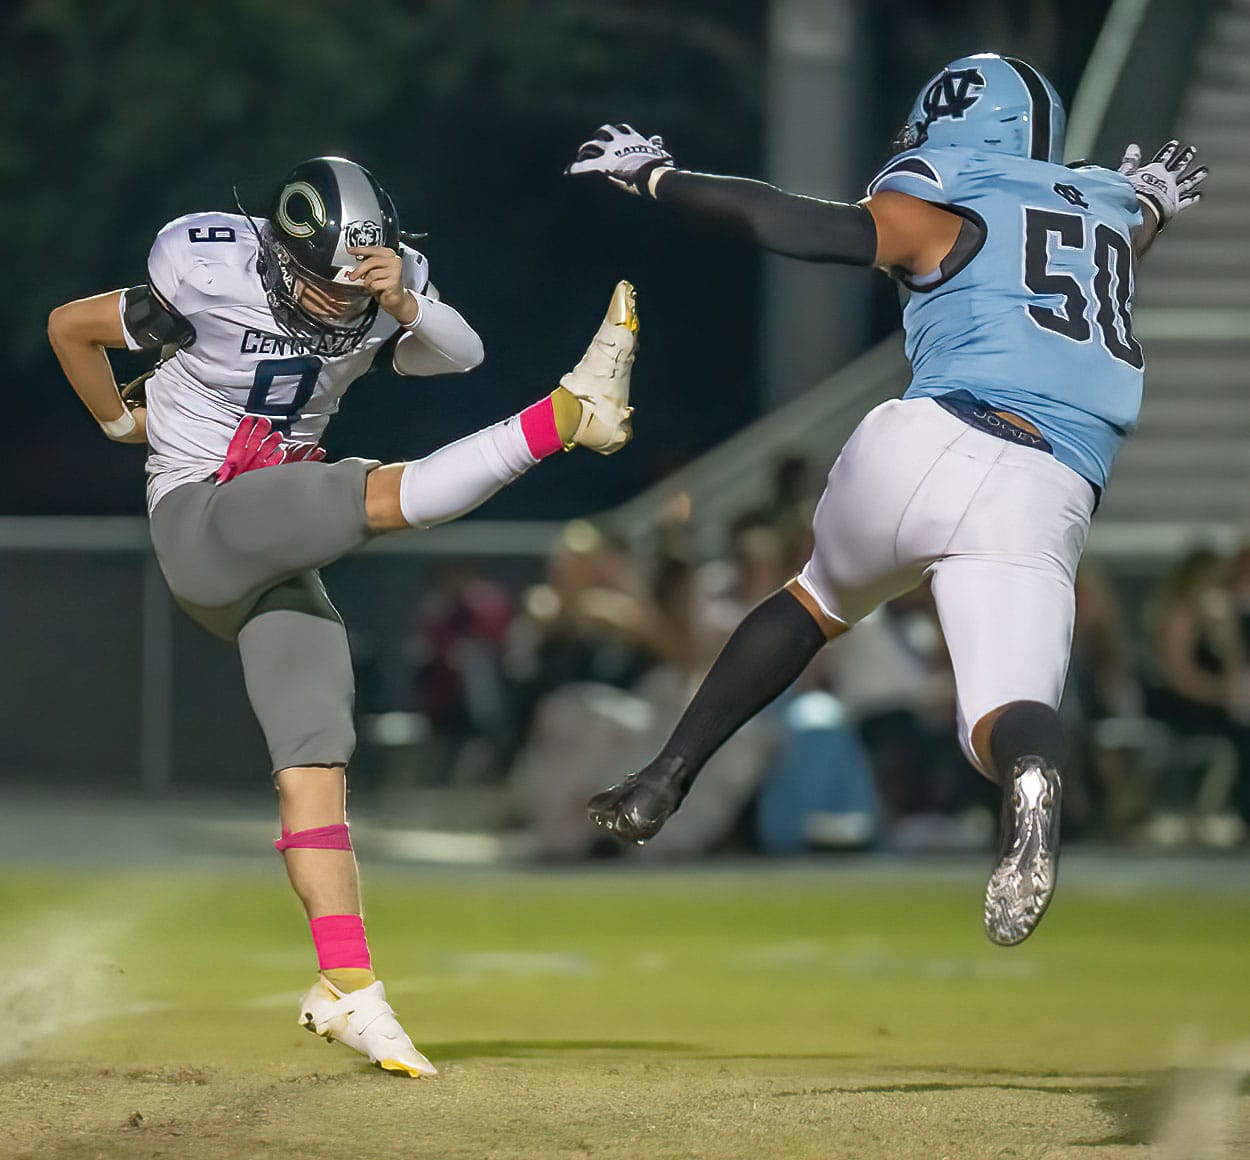 Nature Coast, 50, Gabriel Rios came close to blocking the punt of Central, 9, Colt Botner but was flagged for running into the kicker on the play. Photo by JOE DiCRISTOFALO